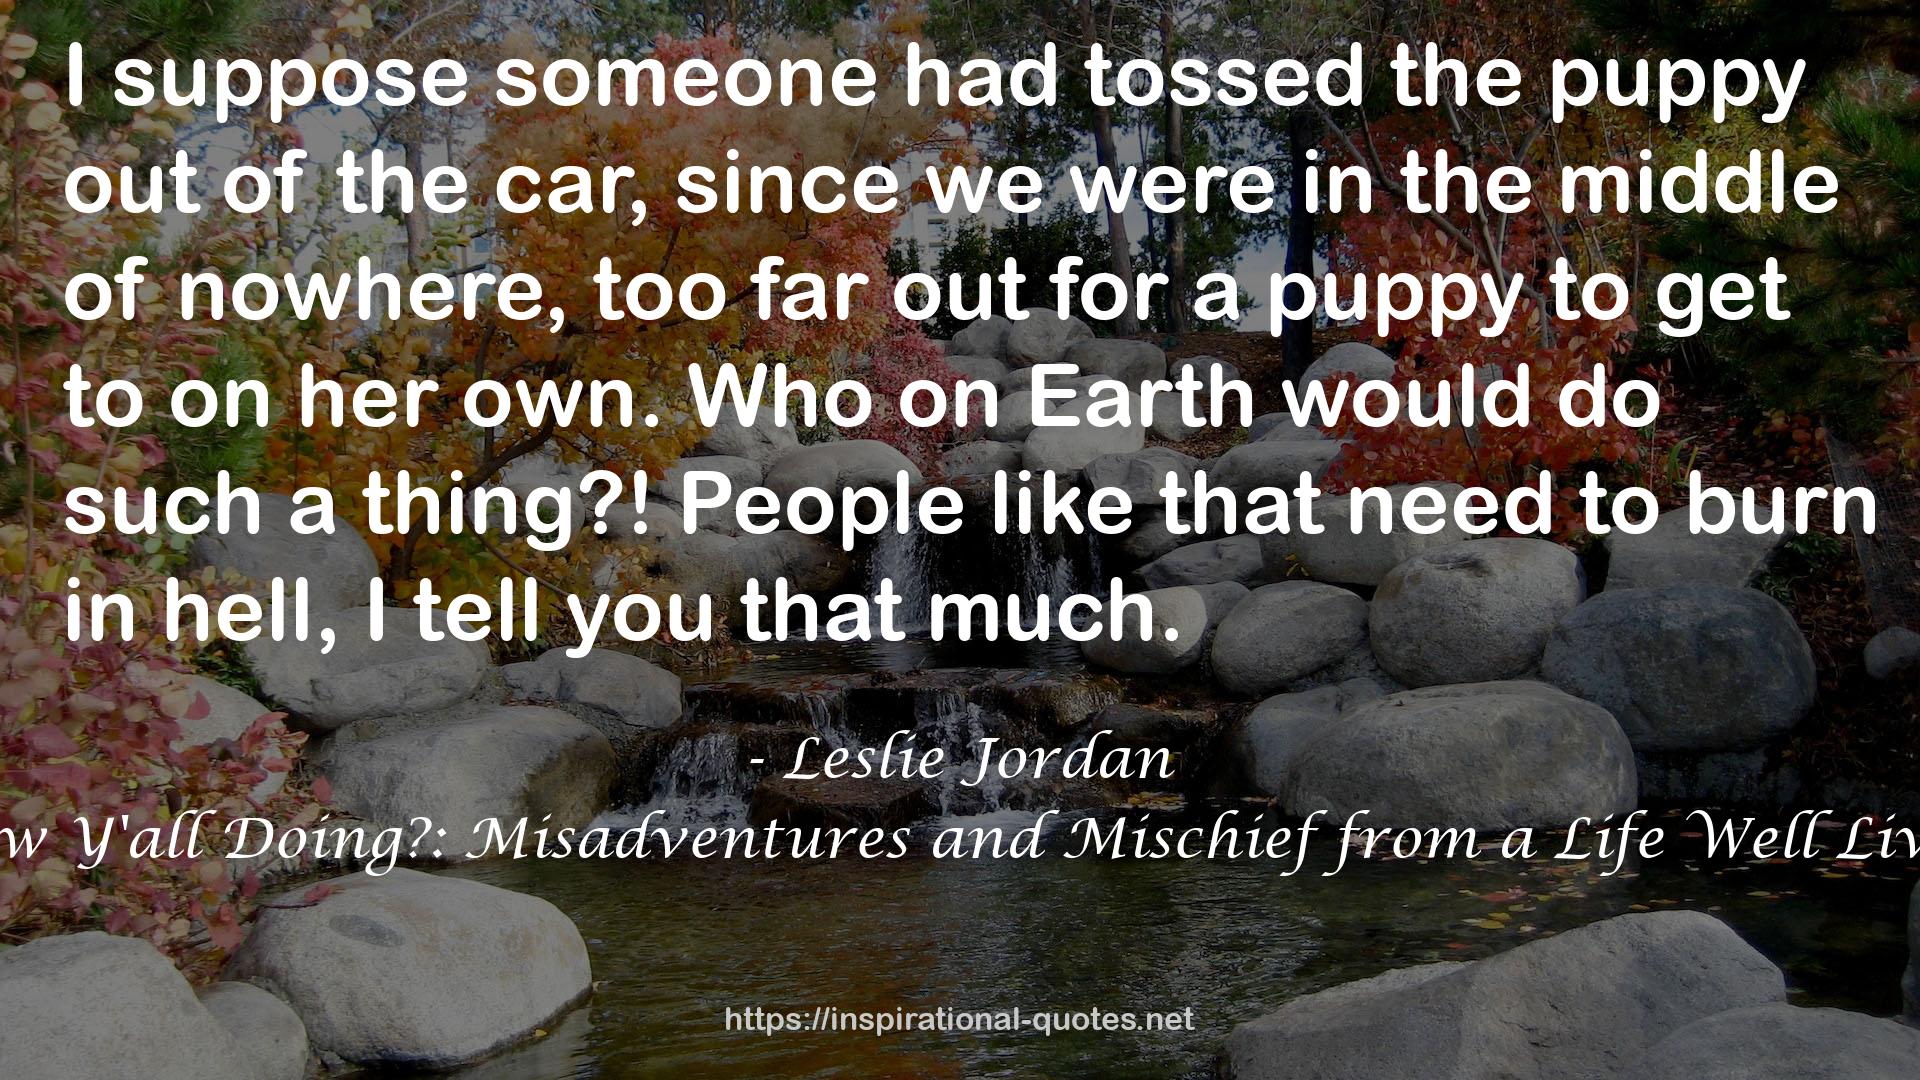 How Y'all Doing?: Misadventures and Mischief from a Life Well Lived QUOTES